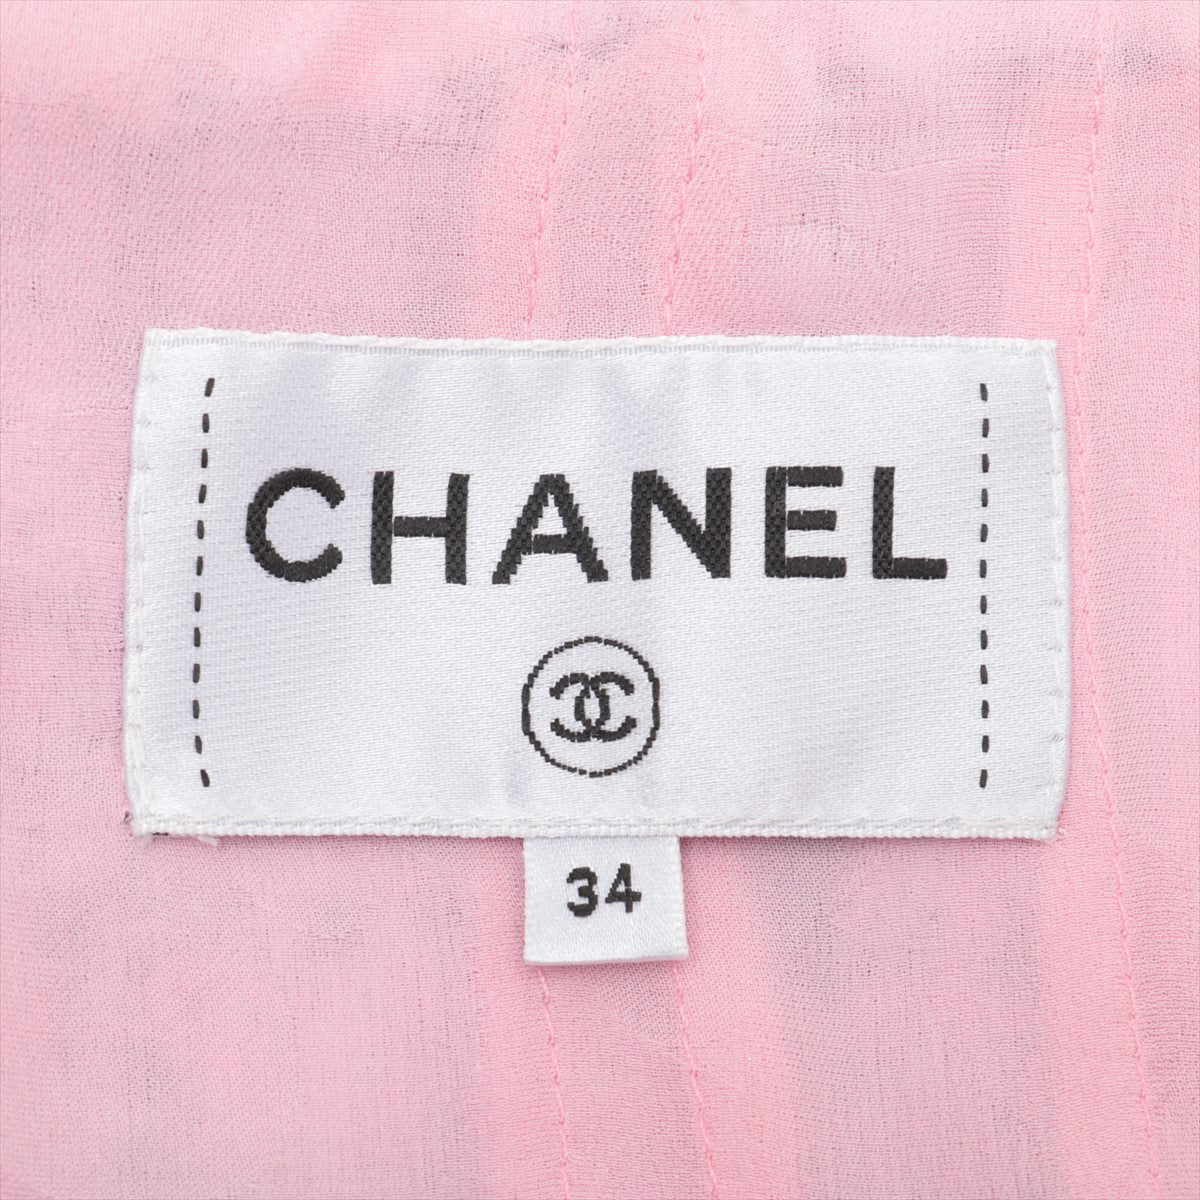 Chanel Coco Button P74 Cotton & Polyester Dress 34 Ladies' Pink  P74420 Gripoix Tweed Imitation pearls